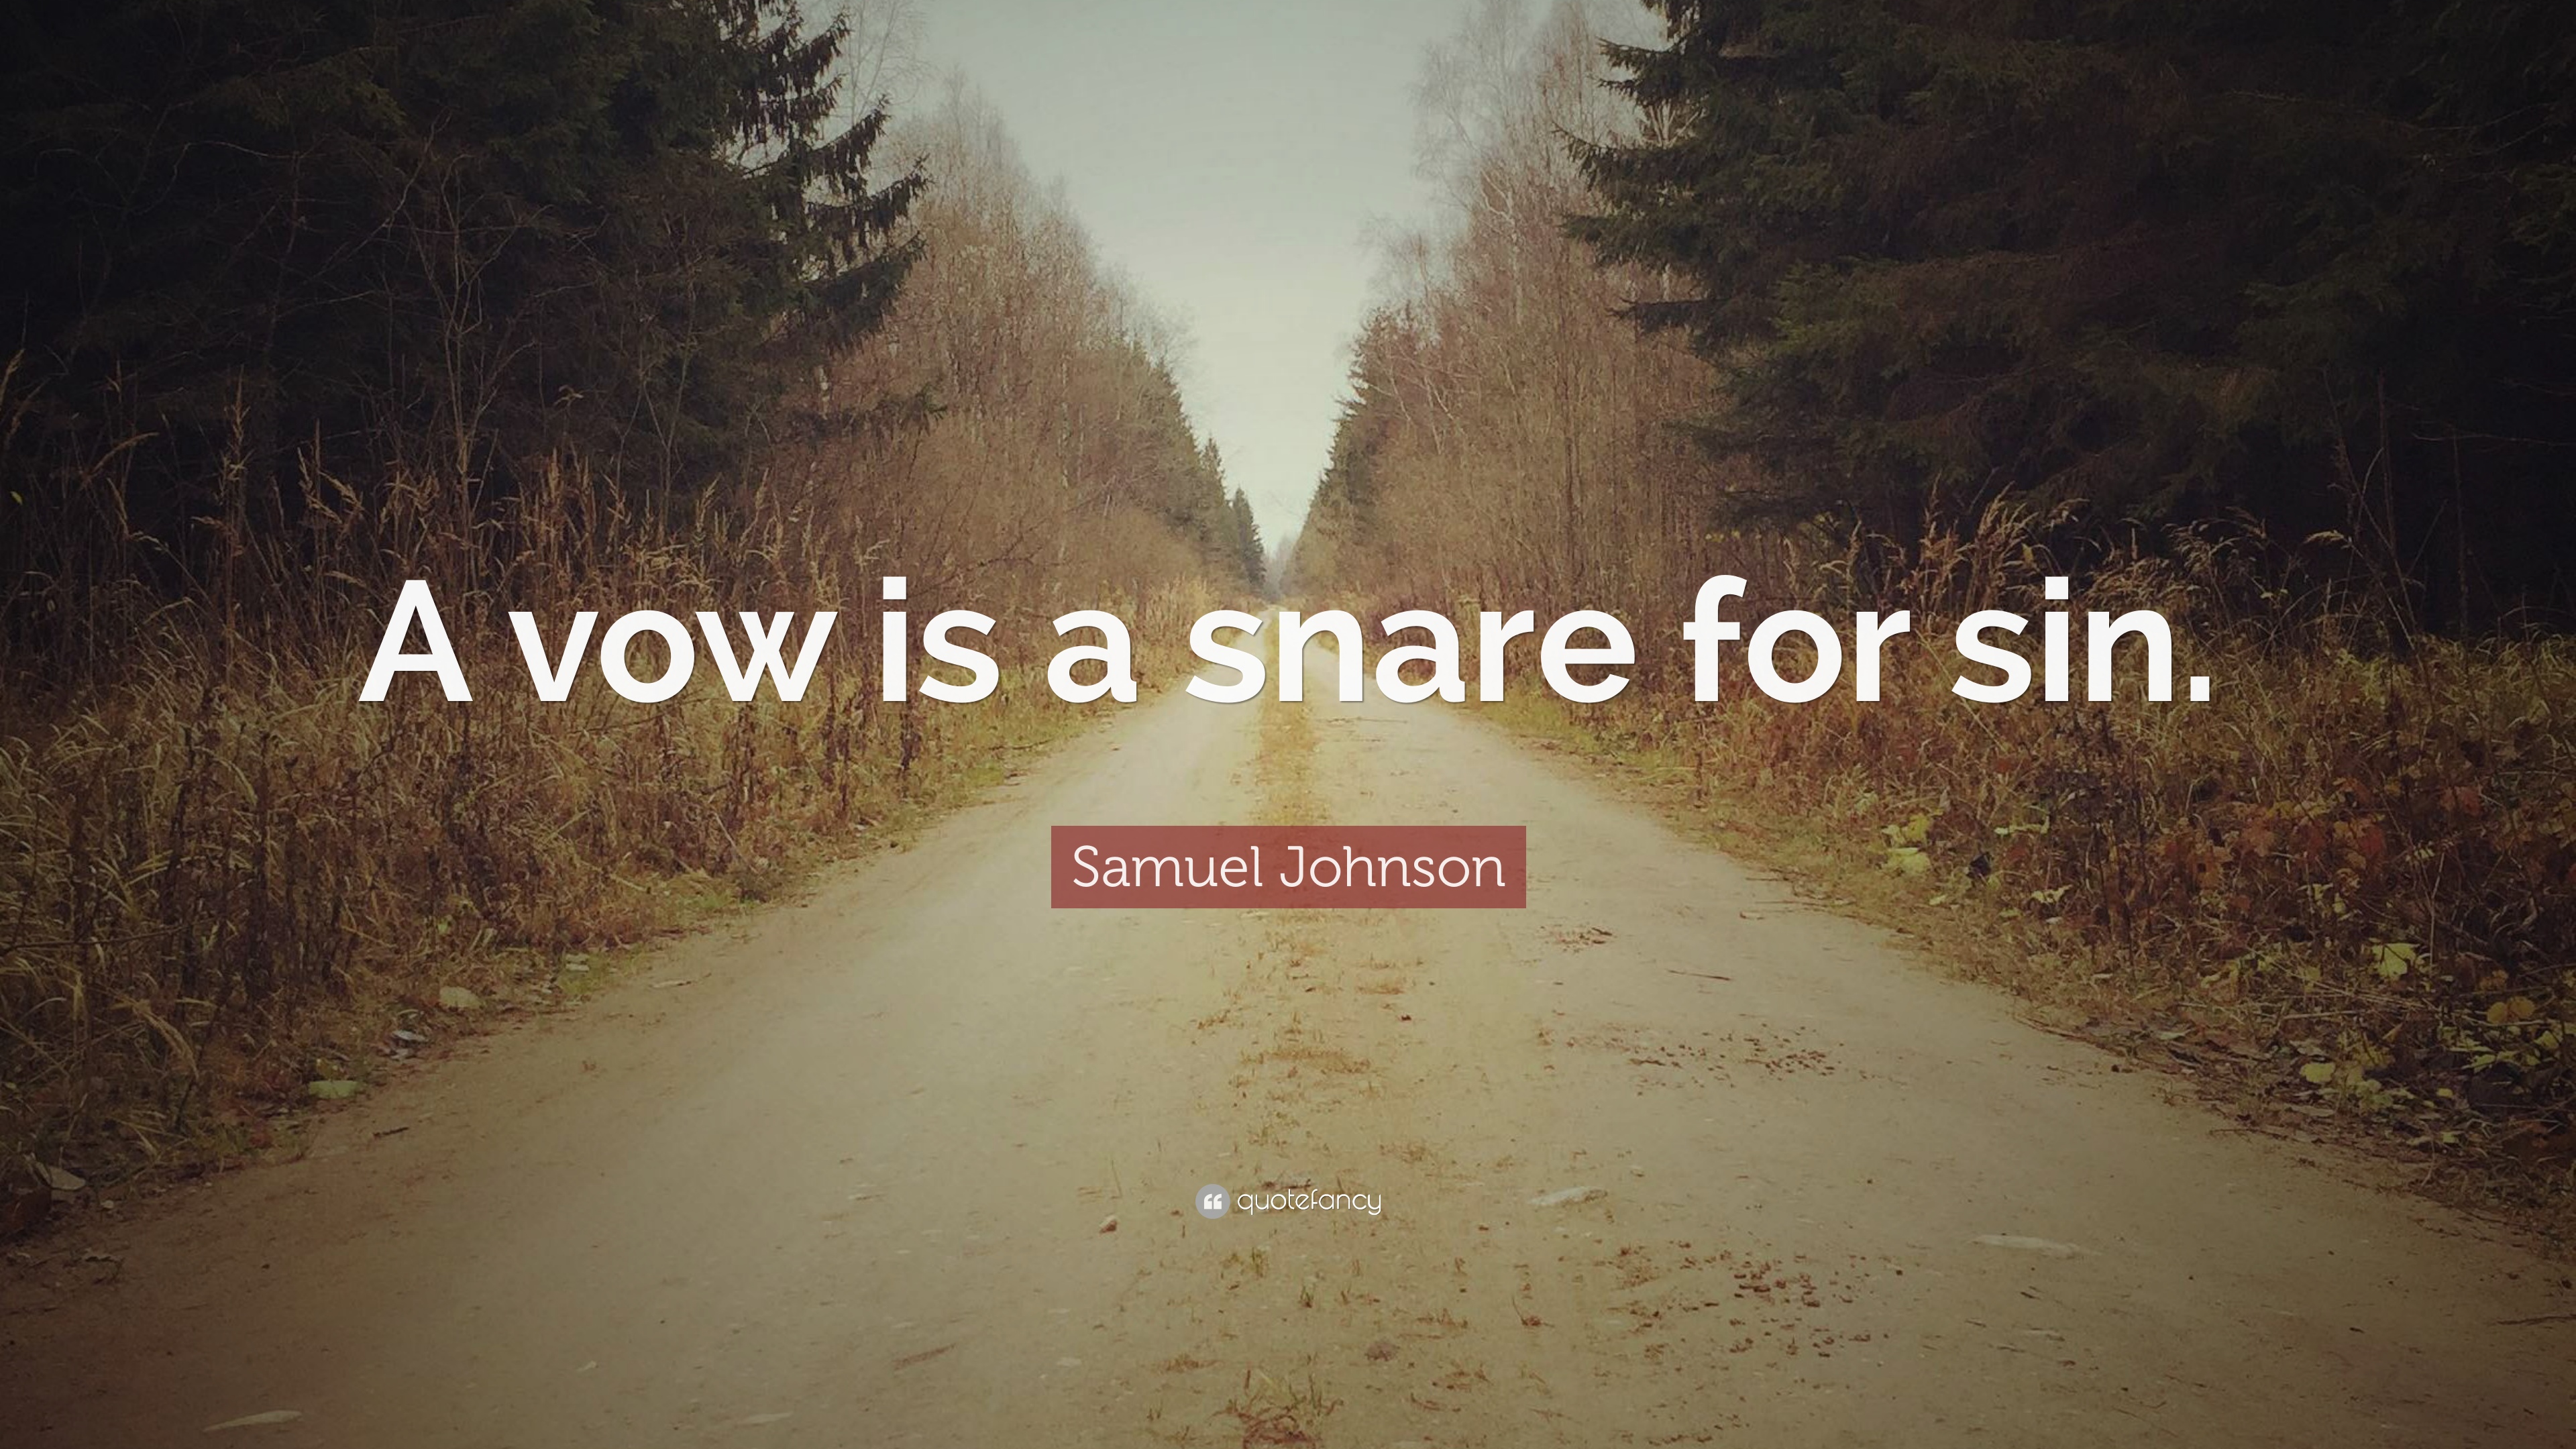 Samuel Johnson Quote: “A vow is a snare for sin.” 7 wallpaper